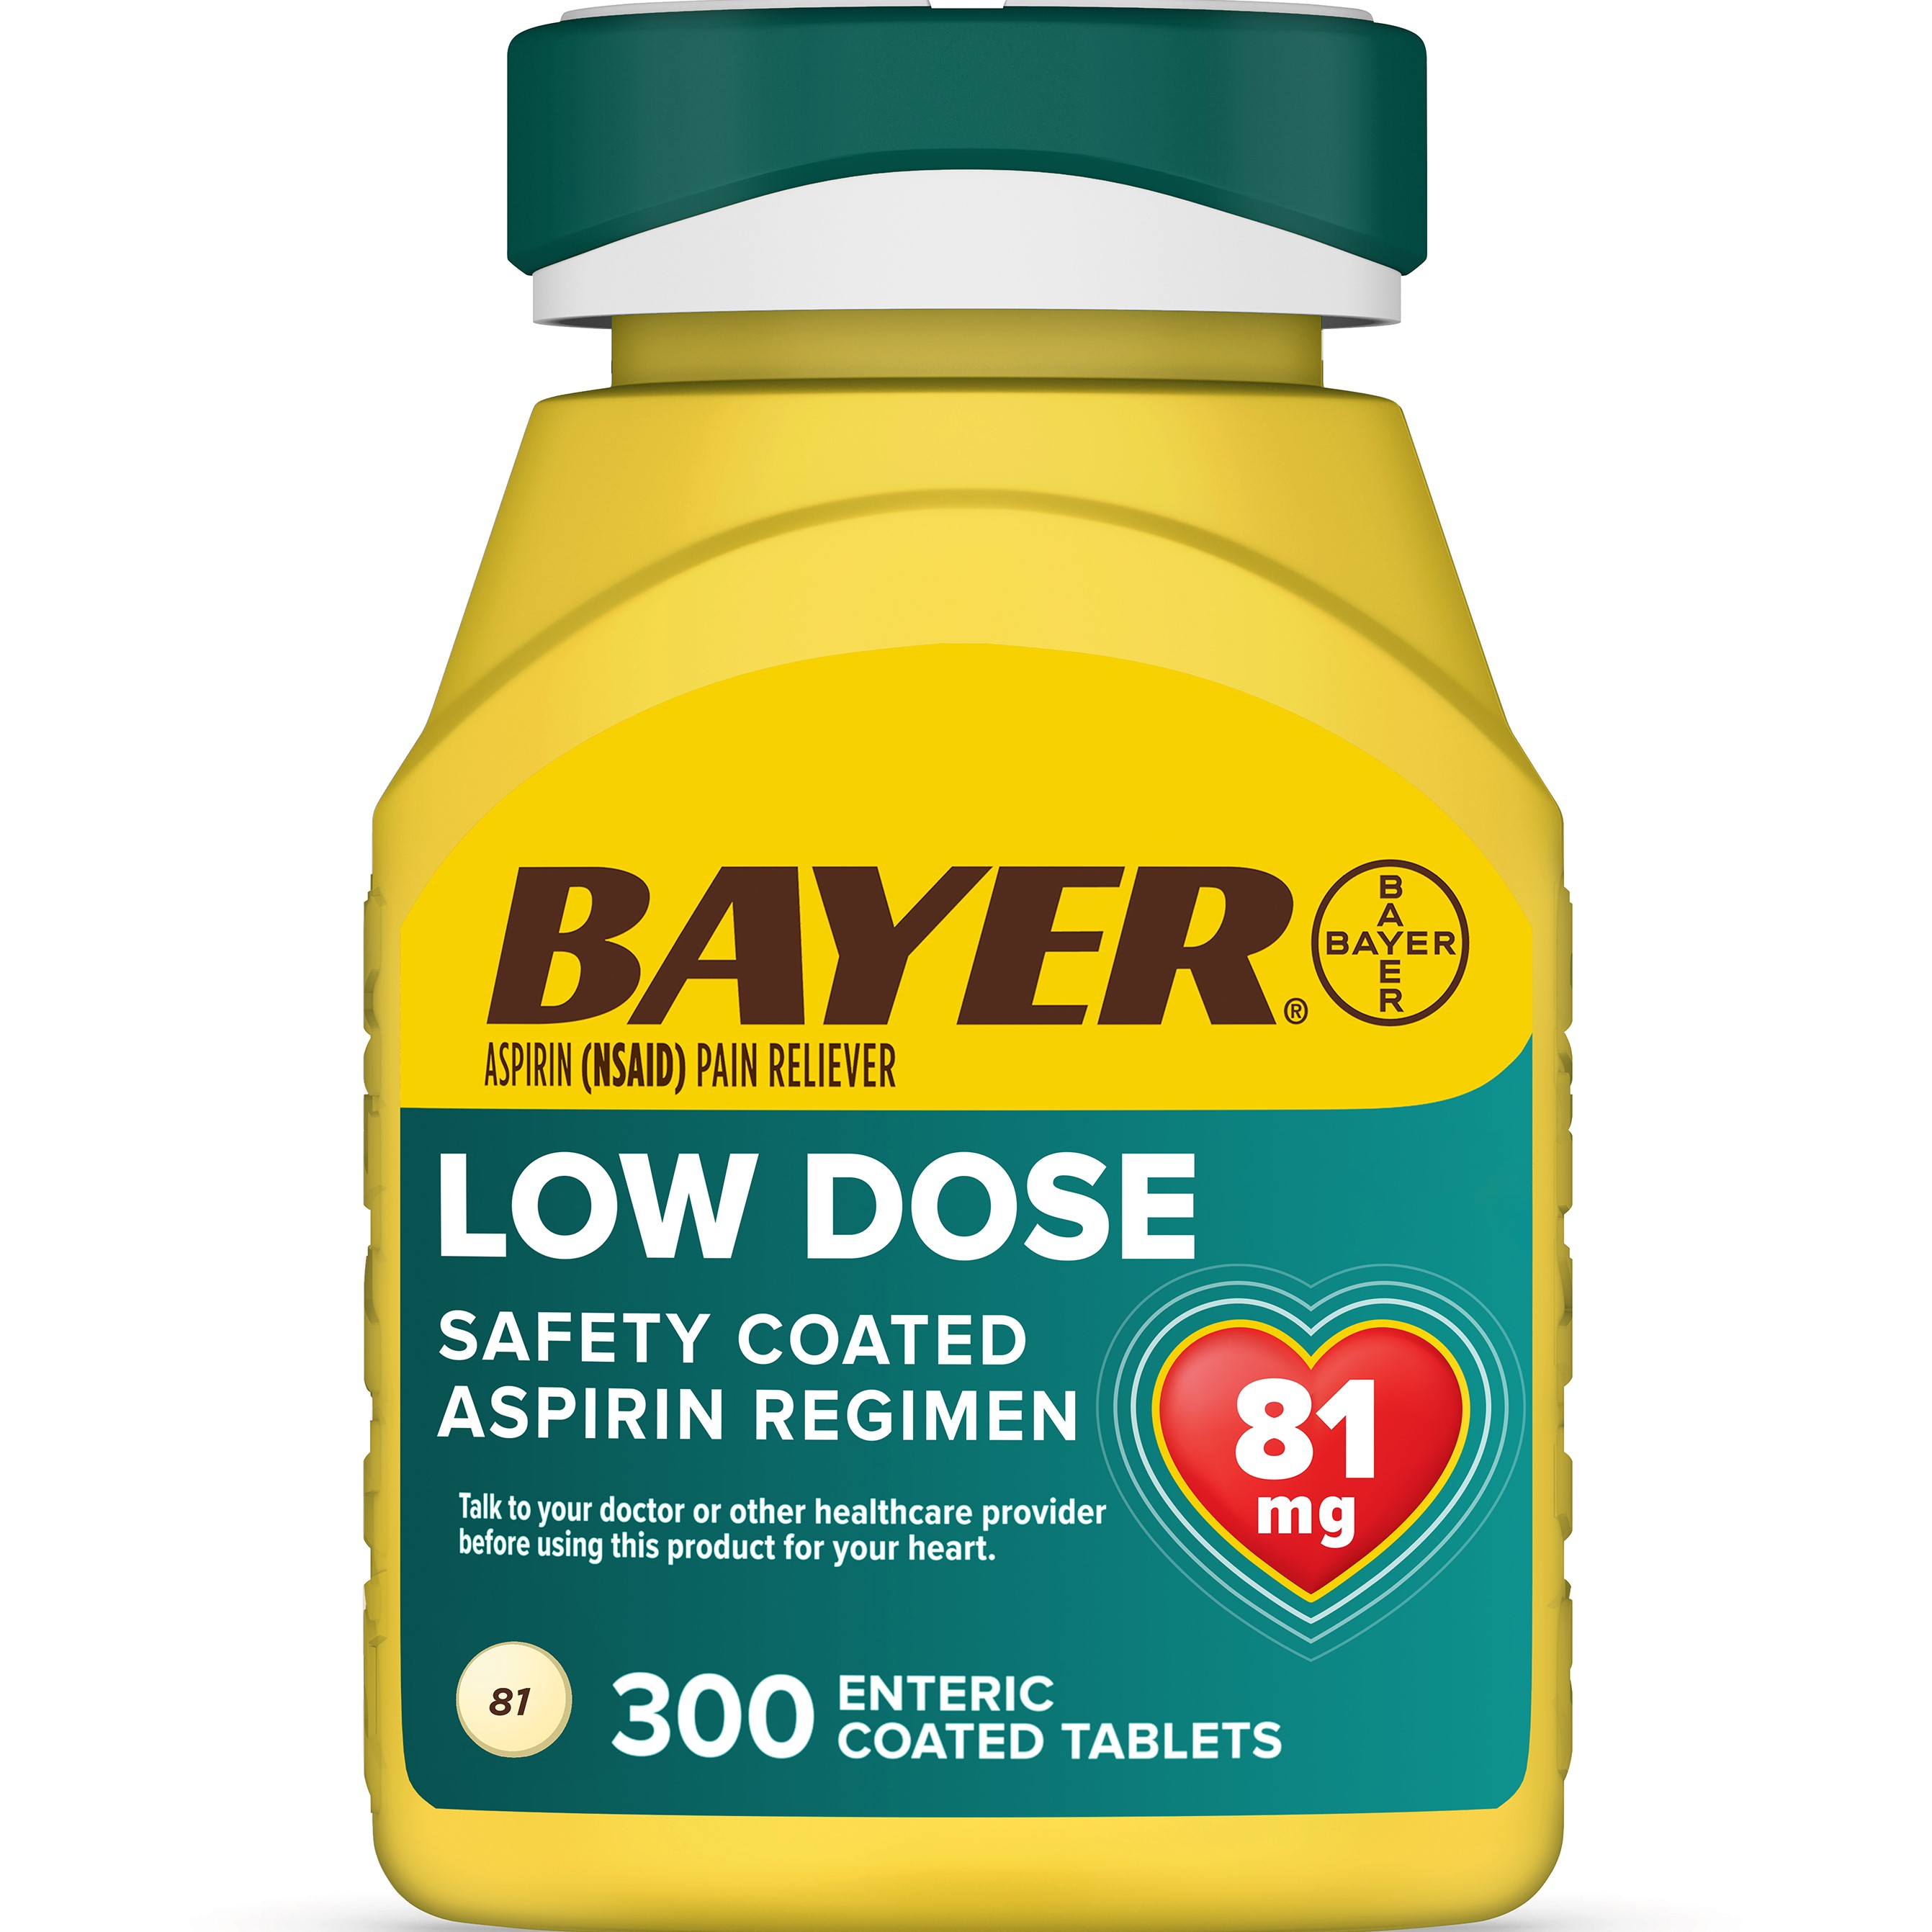 Aspirin Regimen Bayer Low Dose Pain Reliever Enteric Coated Tablets, 81mg, 300 Count - image 2 of 16